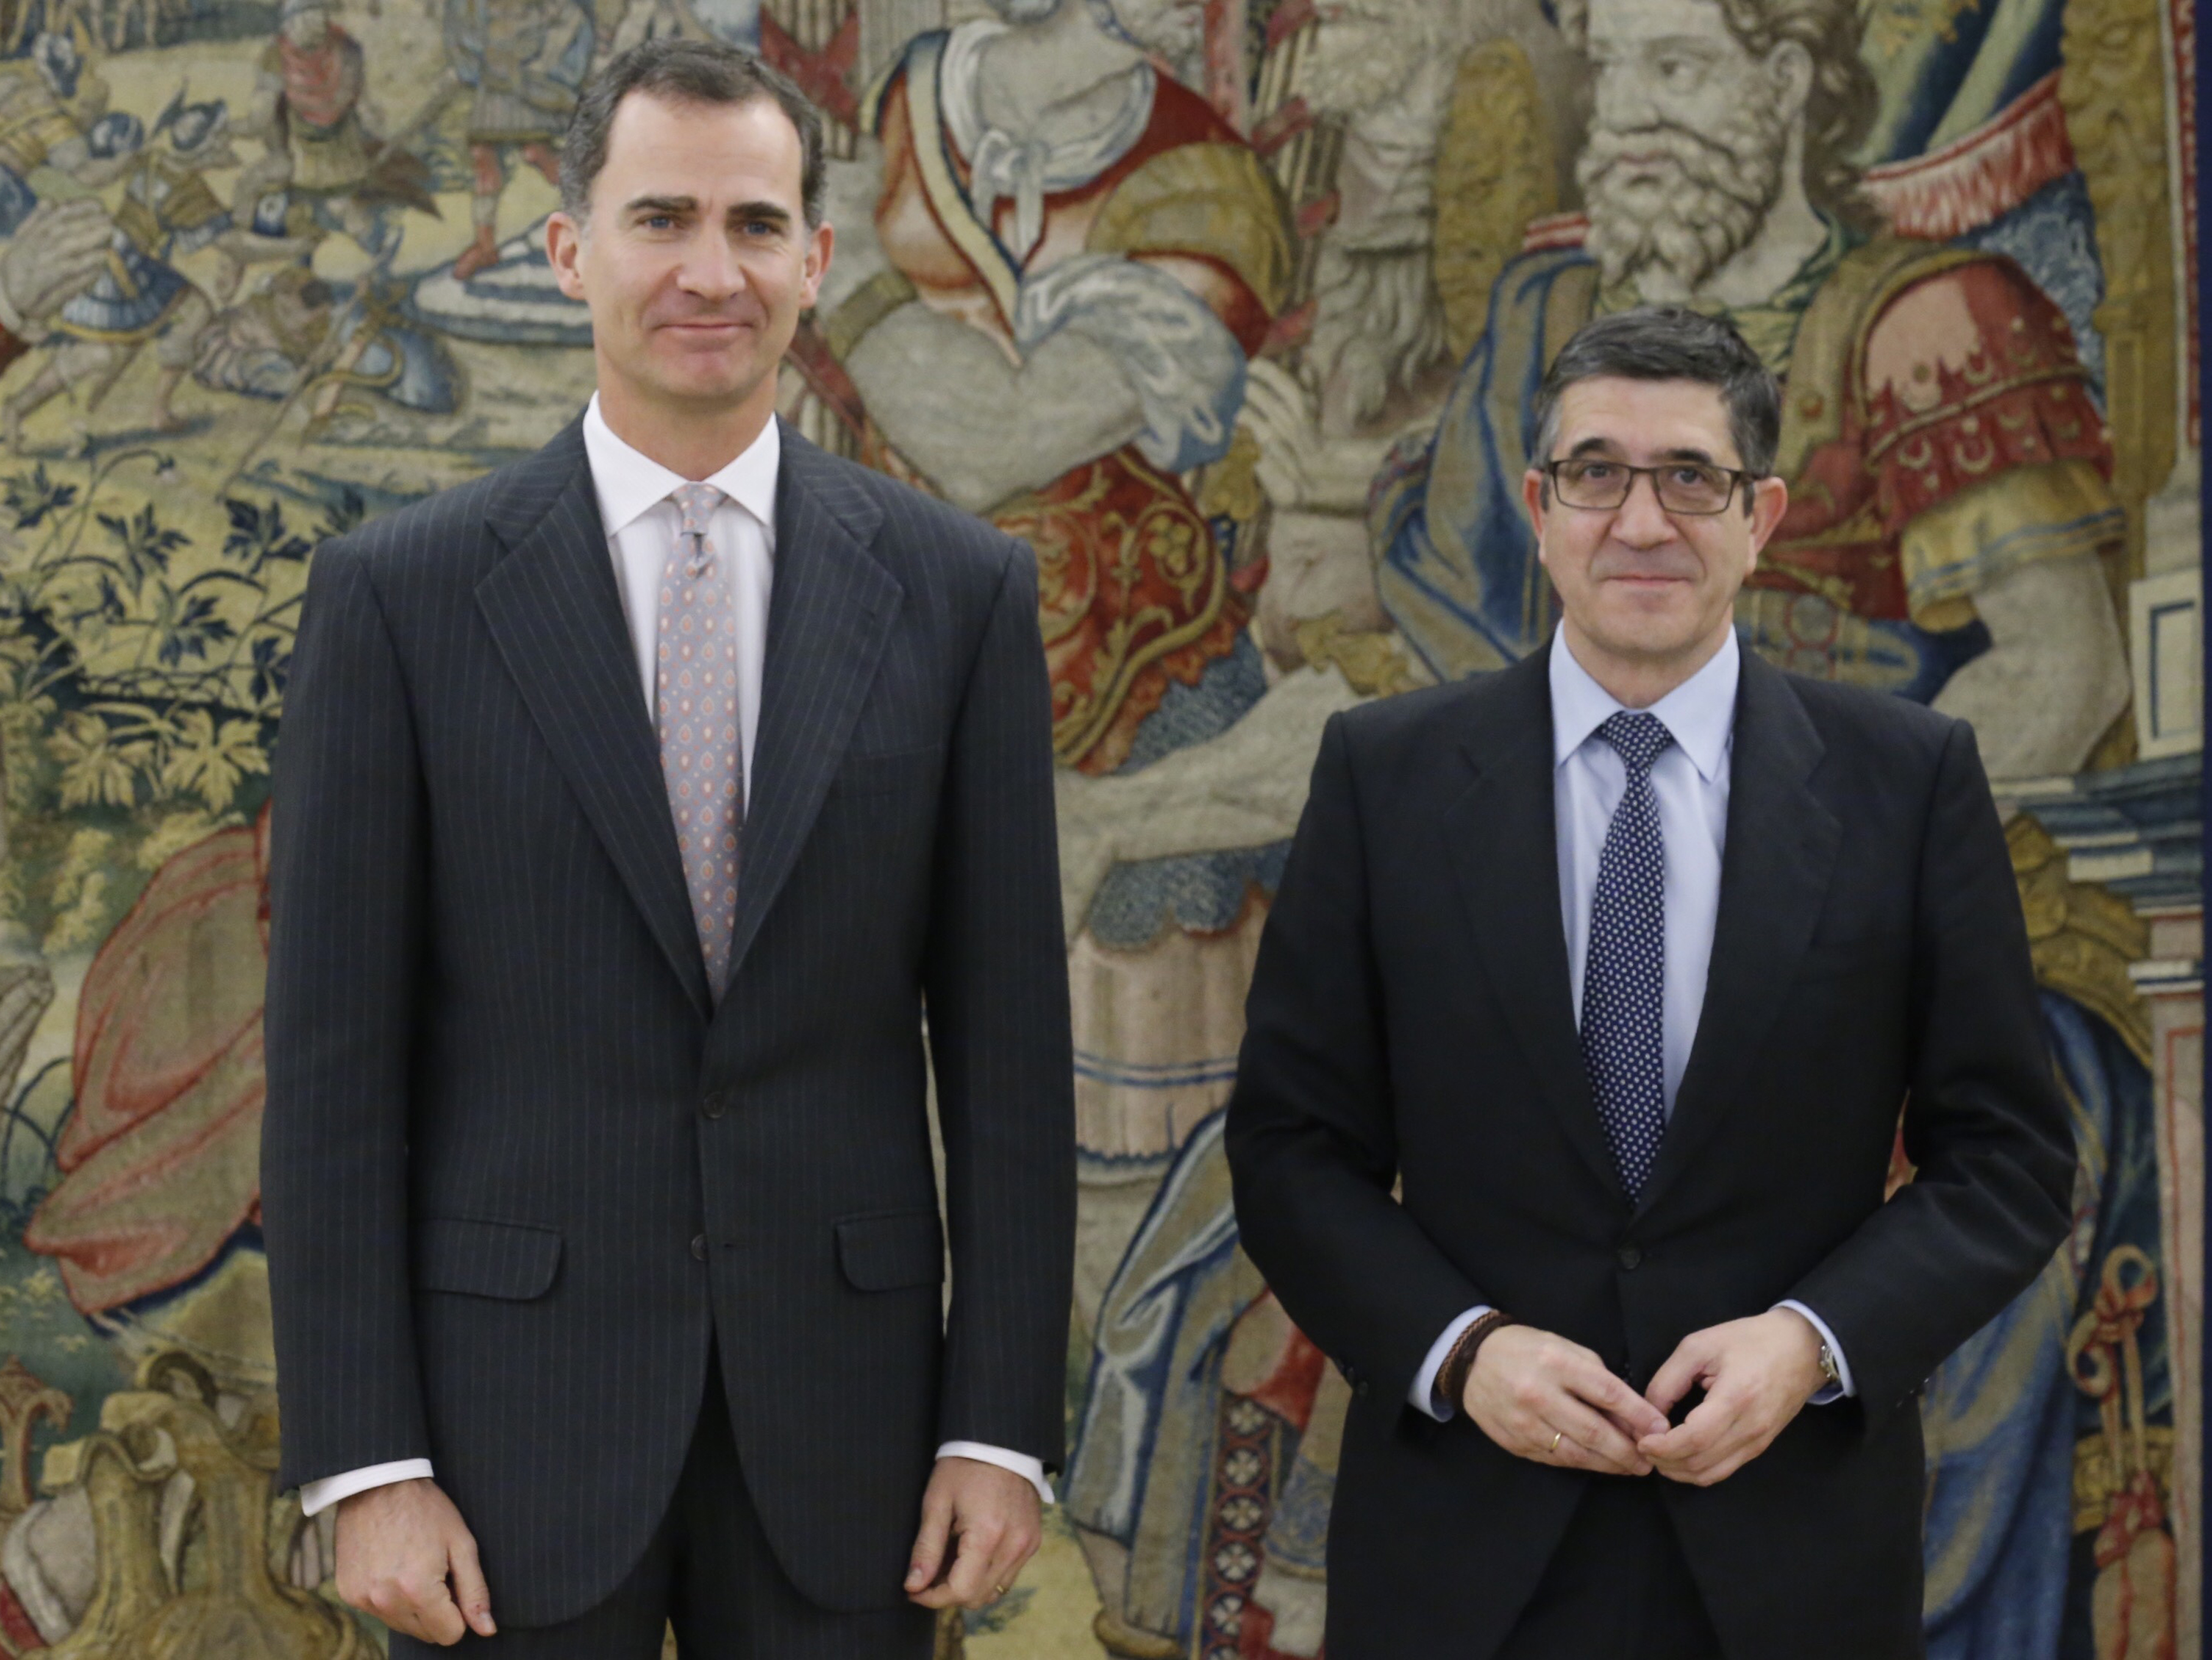 Spanish Kings, Philip VI and the Spanish Parliament's President, Patxi López (by ACN)